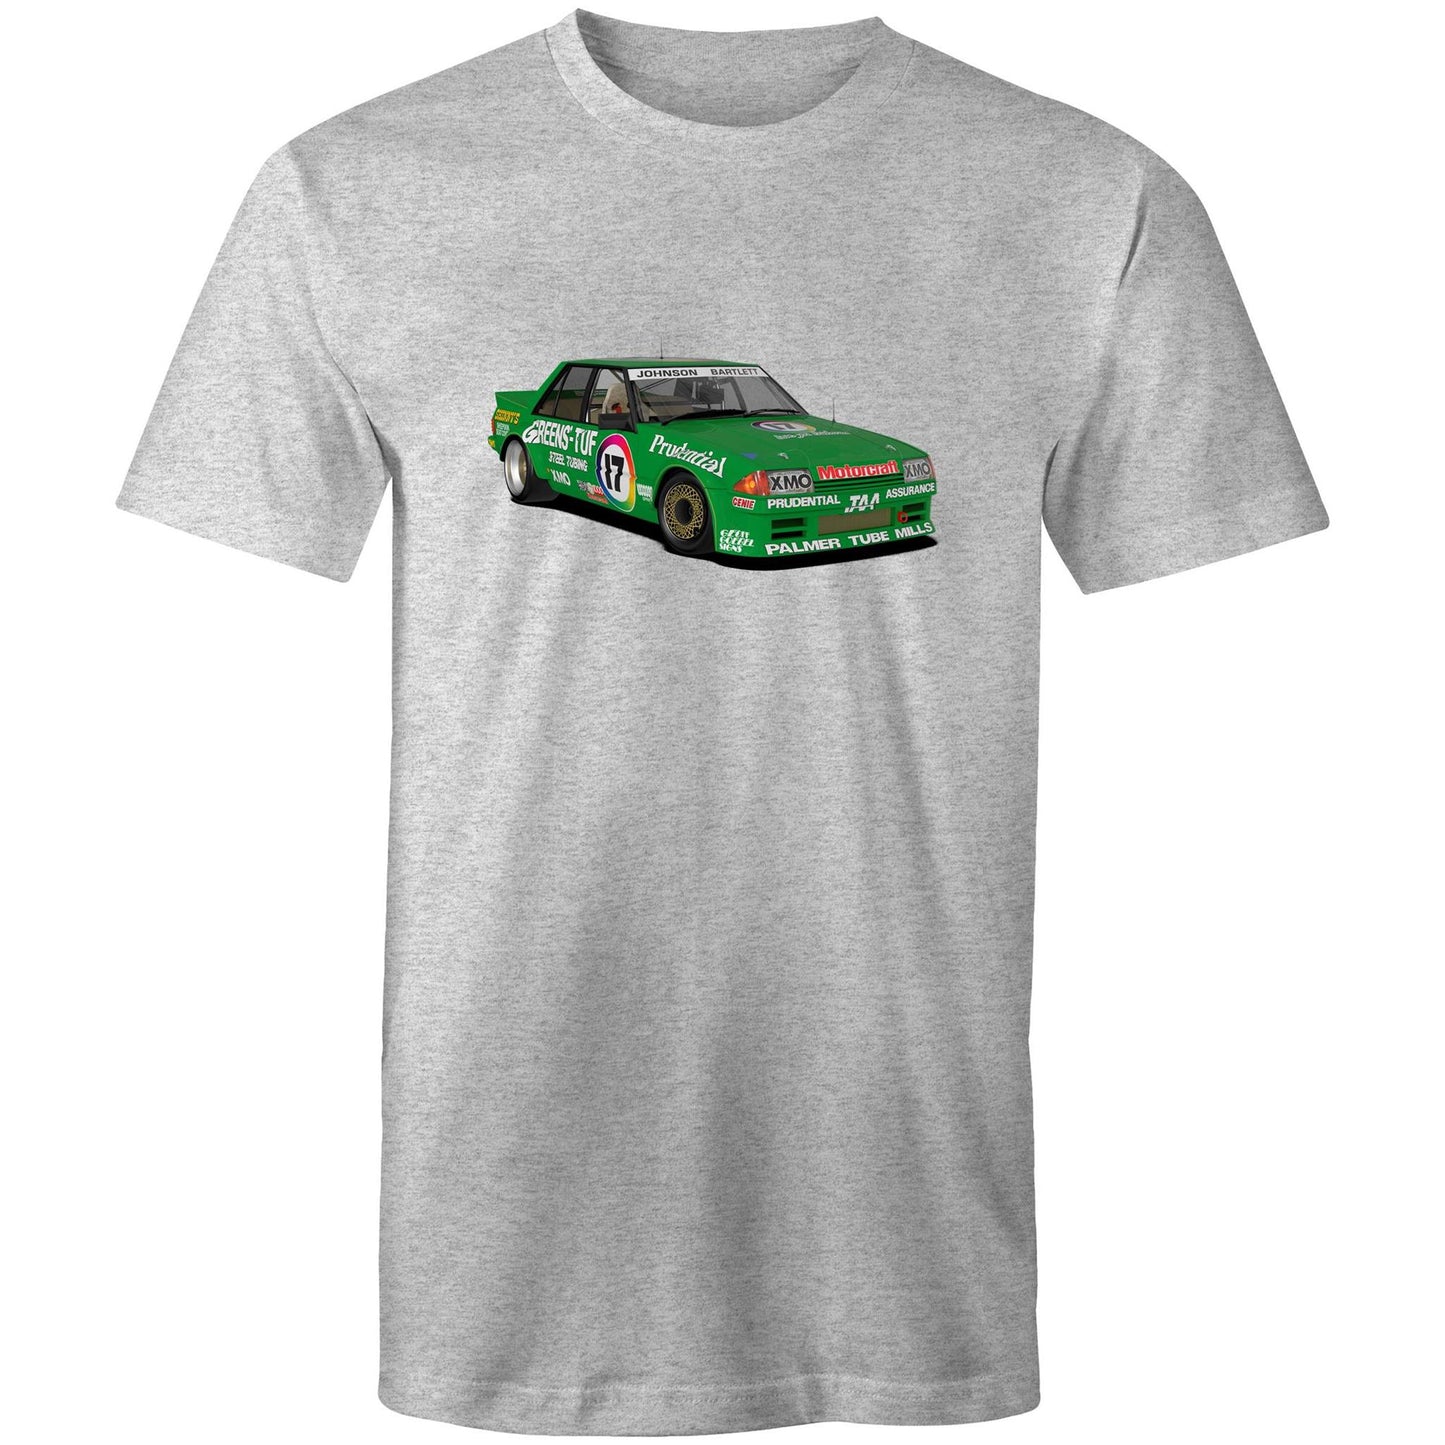 1983 Bathurst 1000 Greens'-Tuf Ford Falcon XE Front View Tee